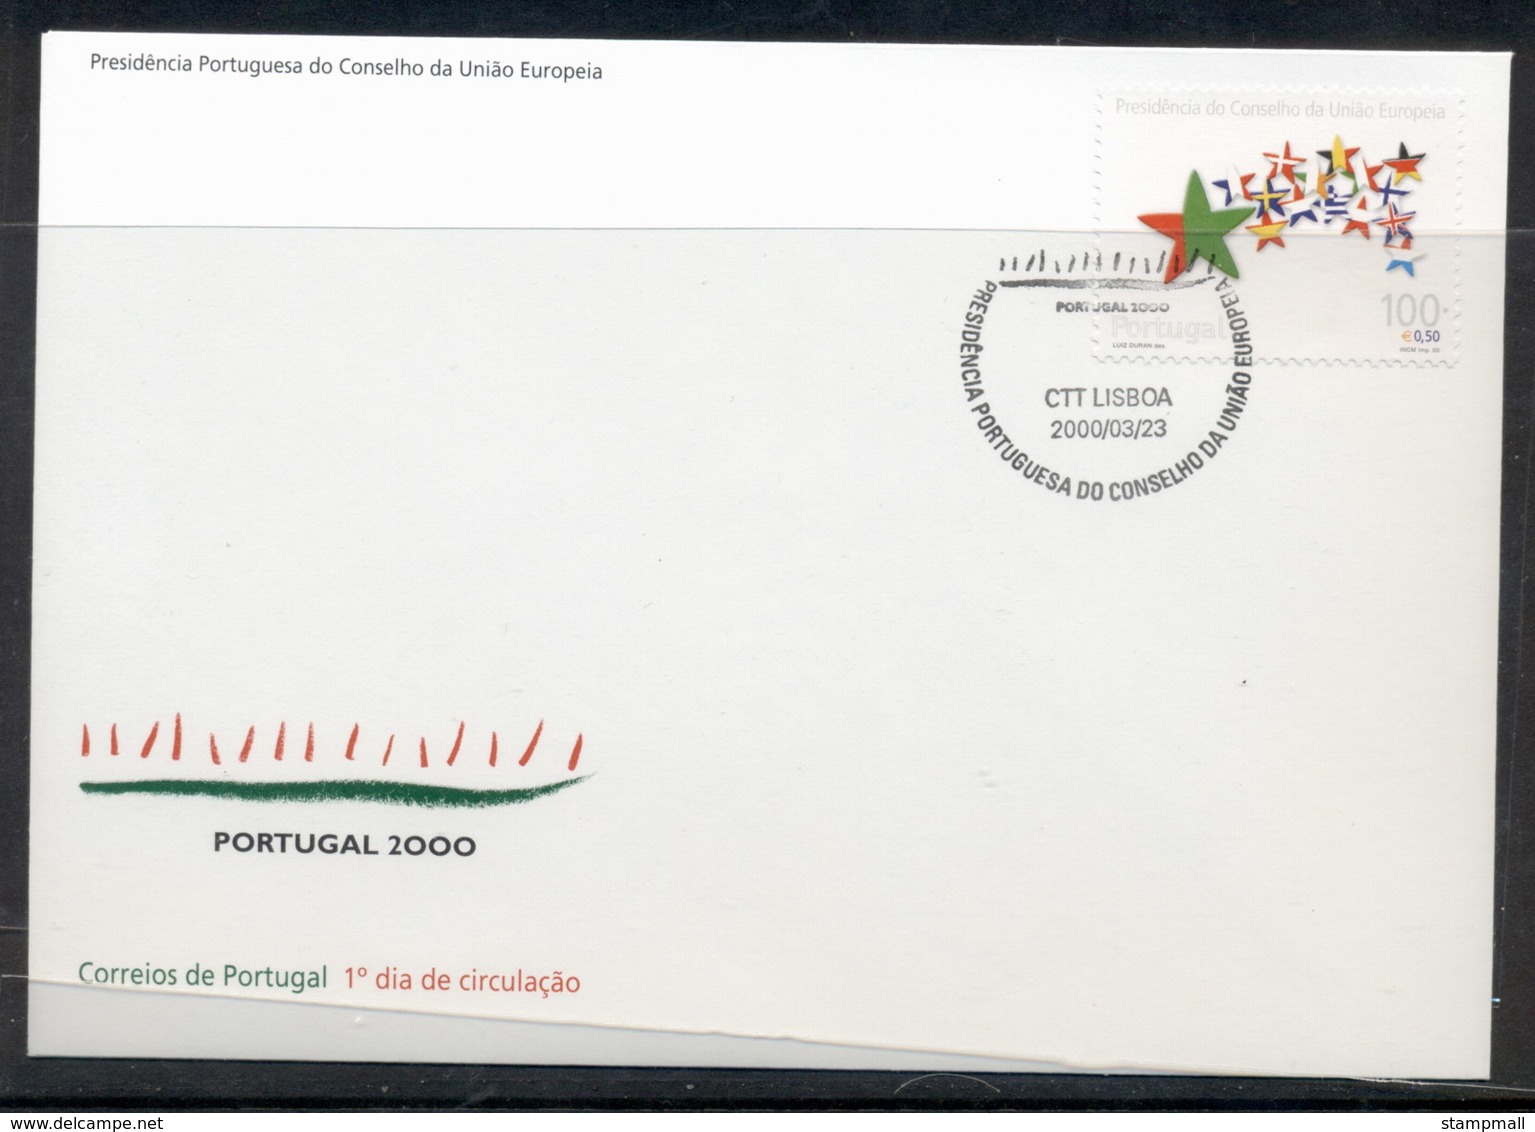 Portugal 2000 Council Of Europe Presidency FDC - FDC